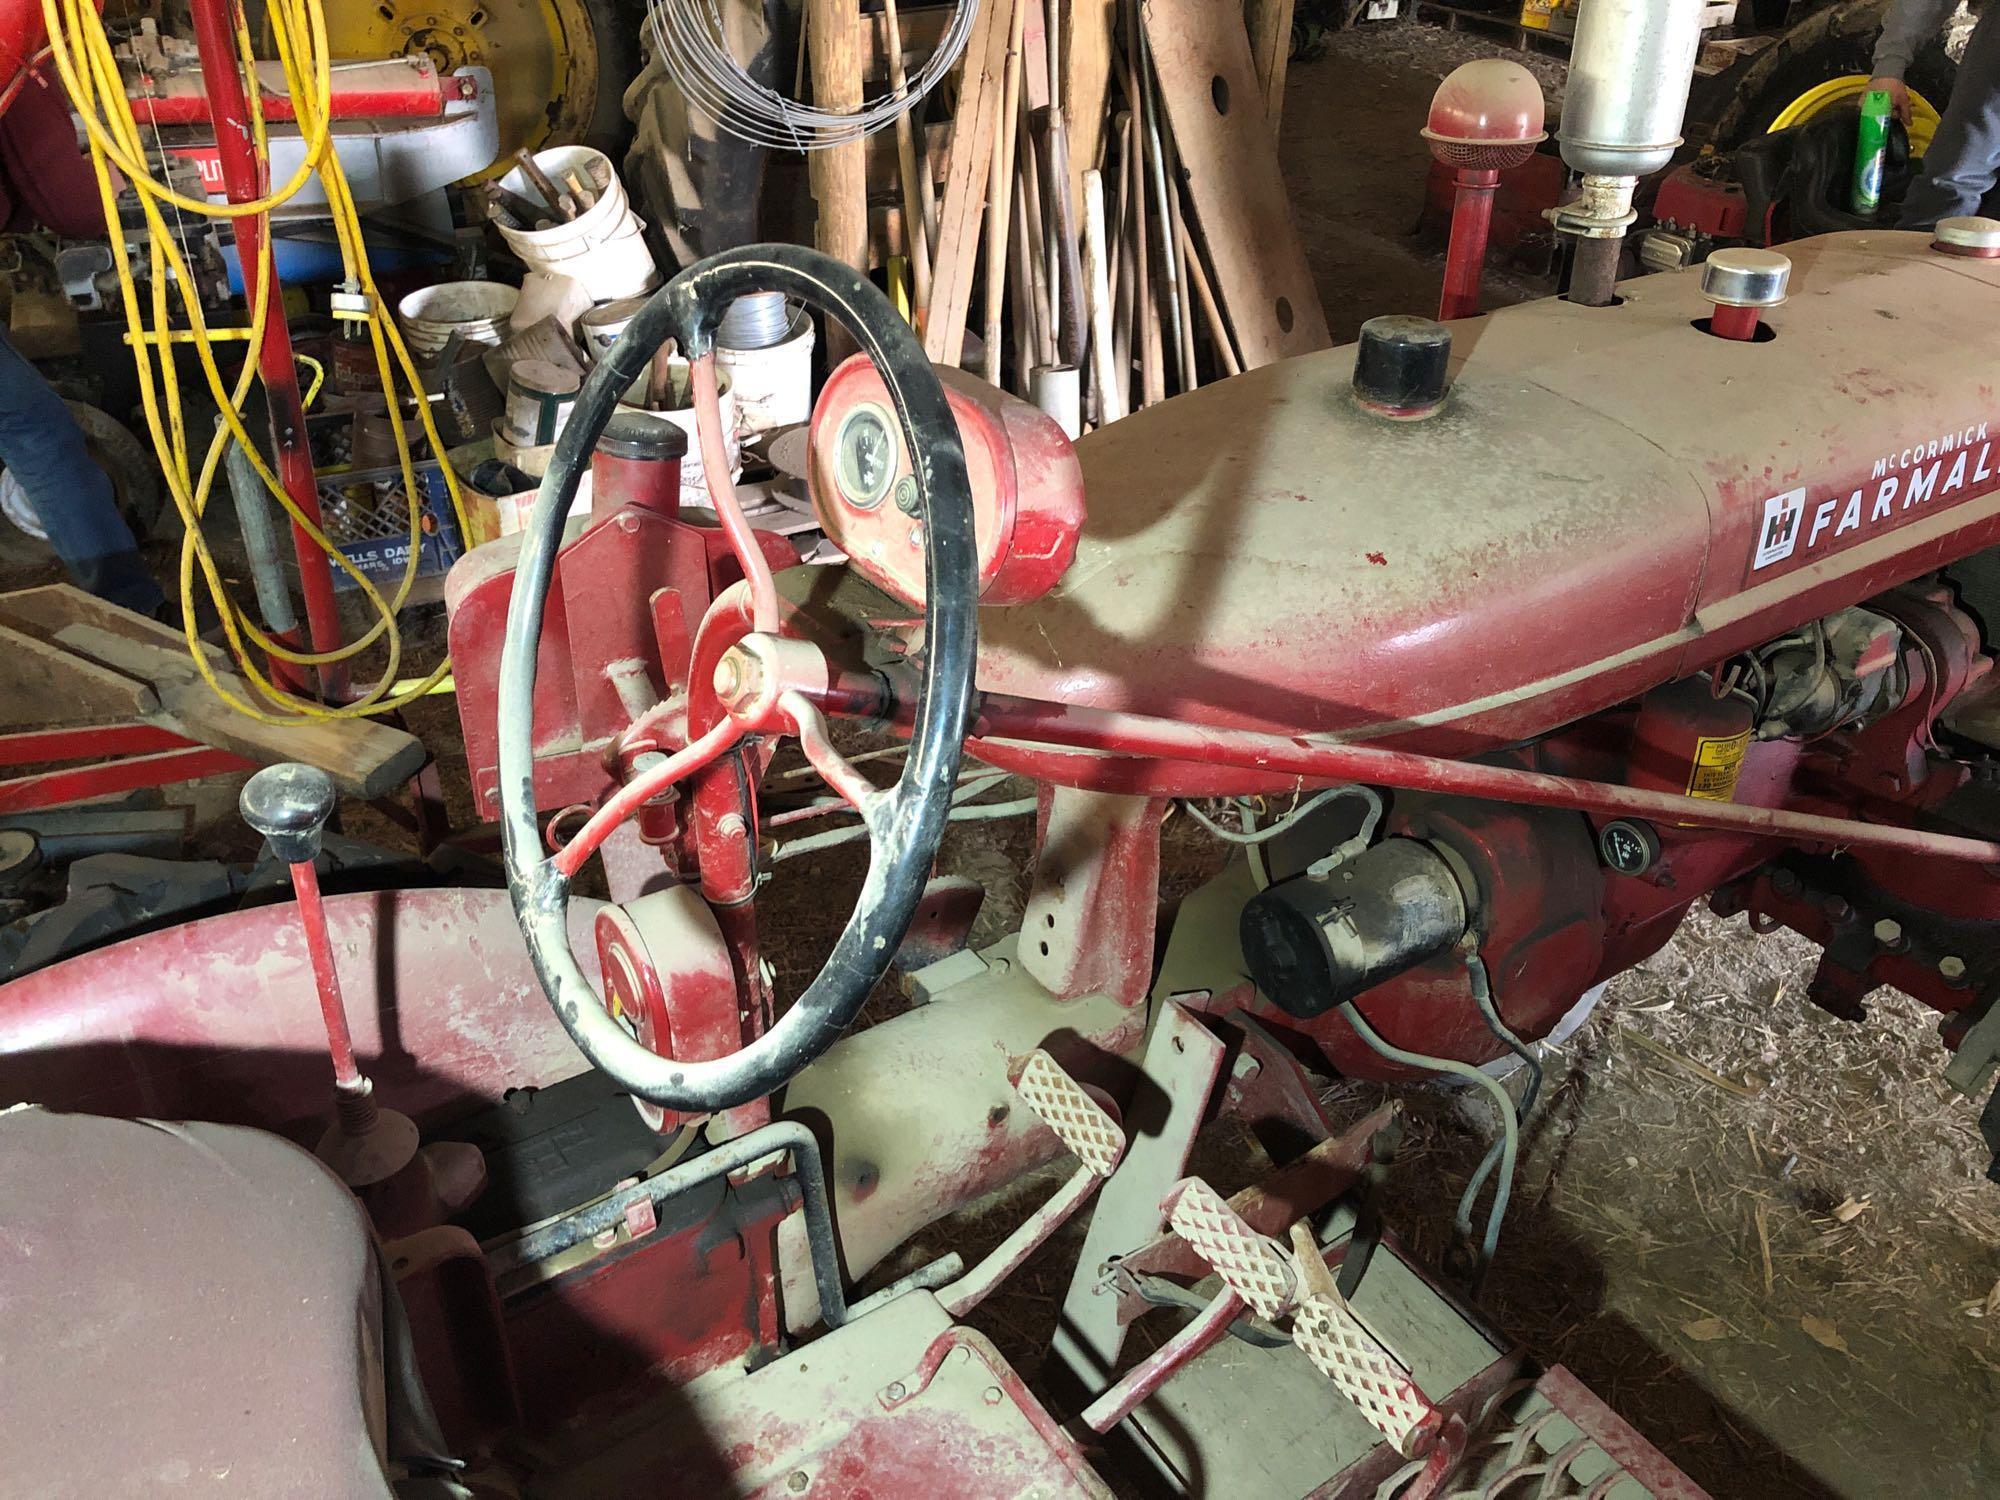 Farmall A Cultivision Wide Front Tractor, Gas, SN:171316